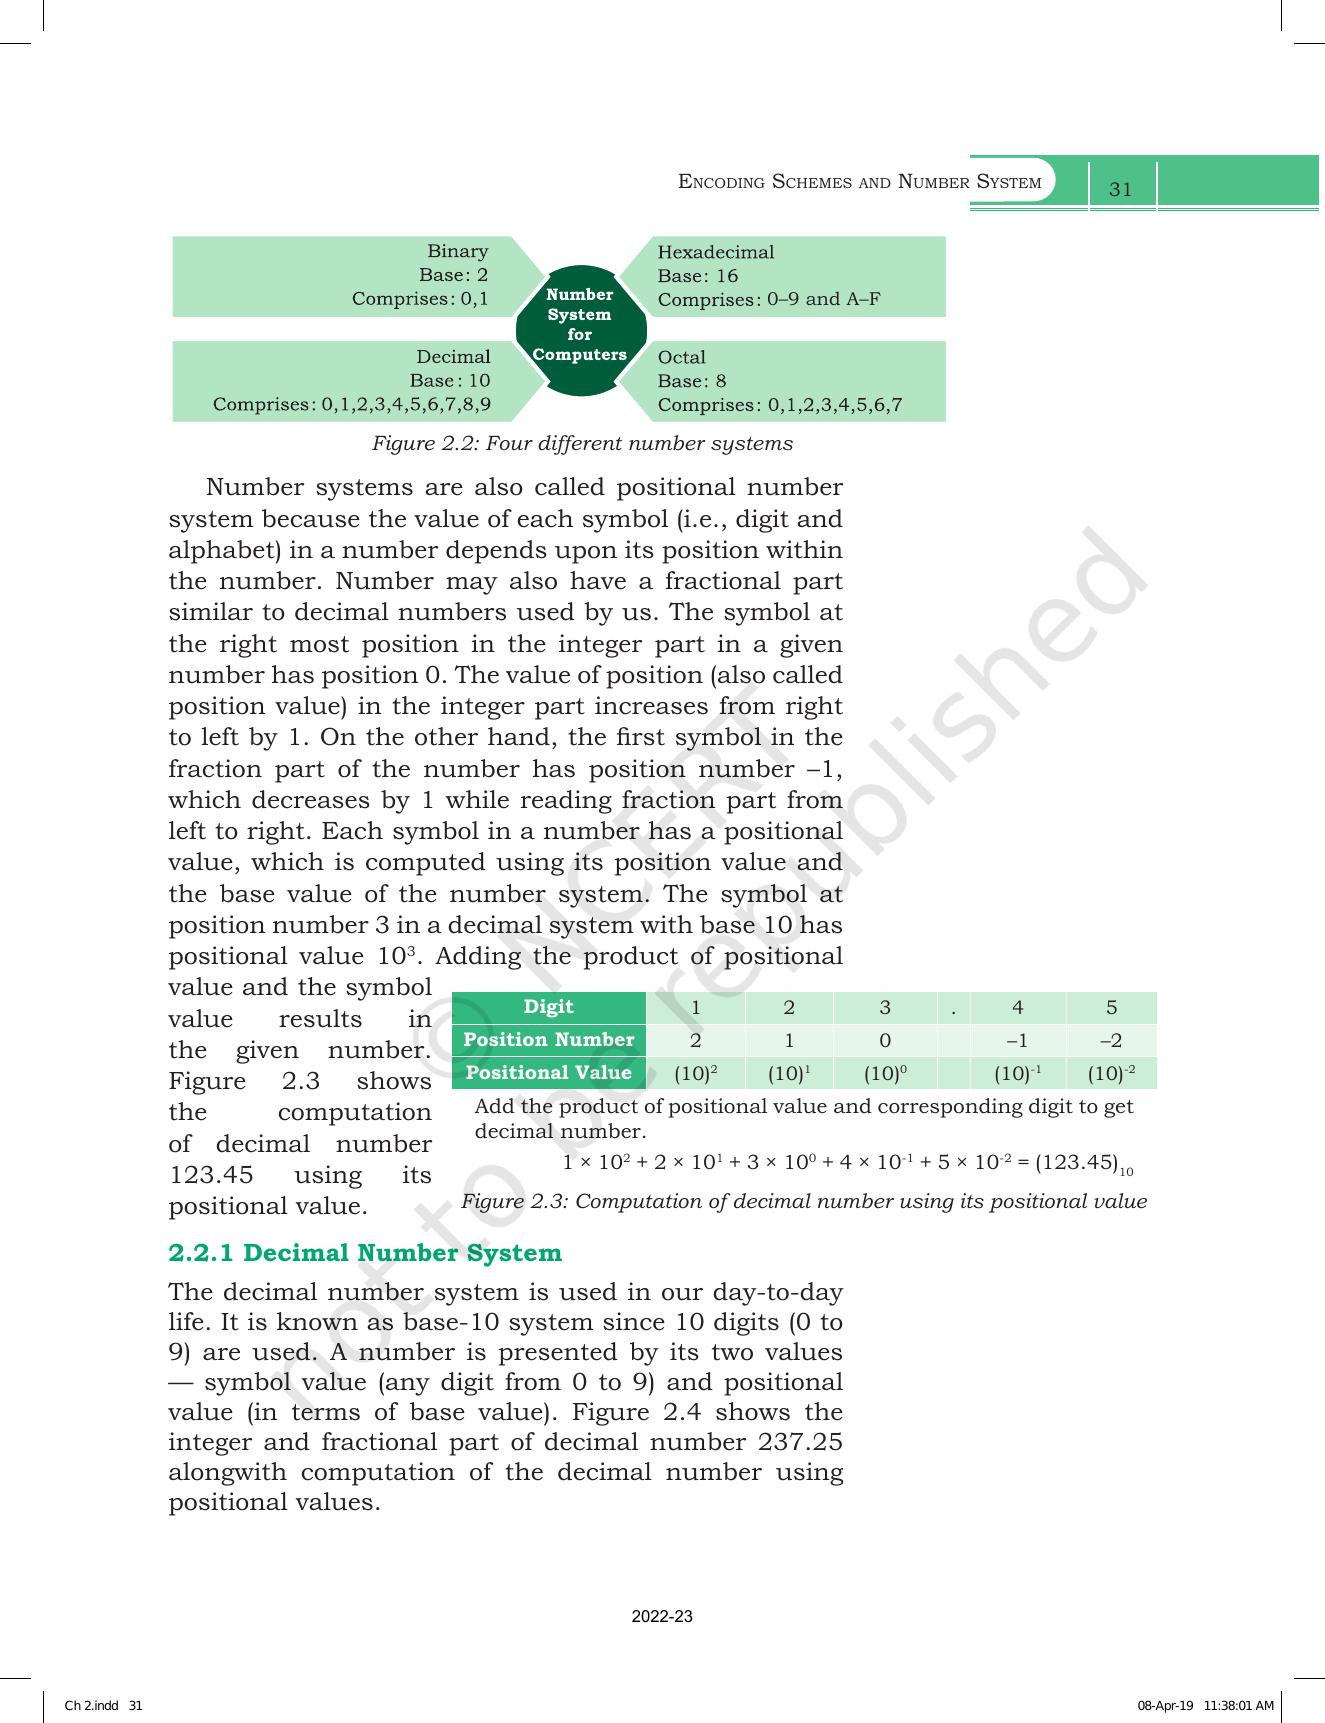 NCERT Book for Class 11 Computer Science Chapter 2 Encoding Schemes and Number System - Page 5